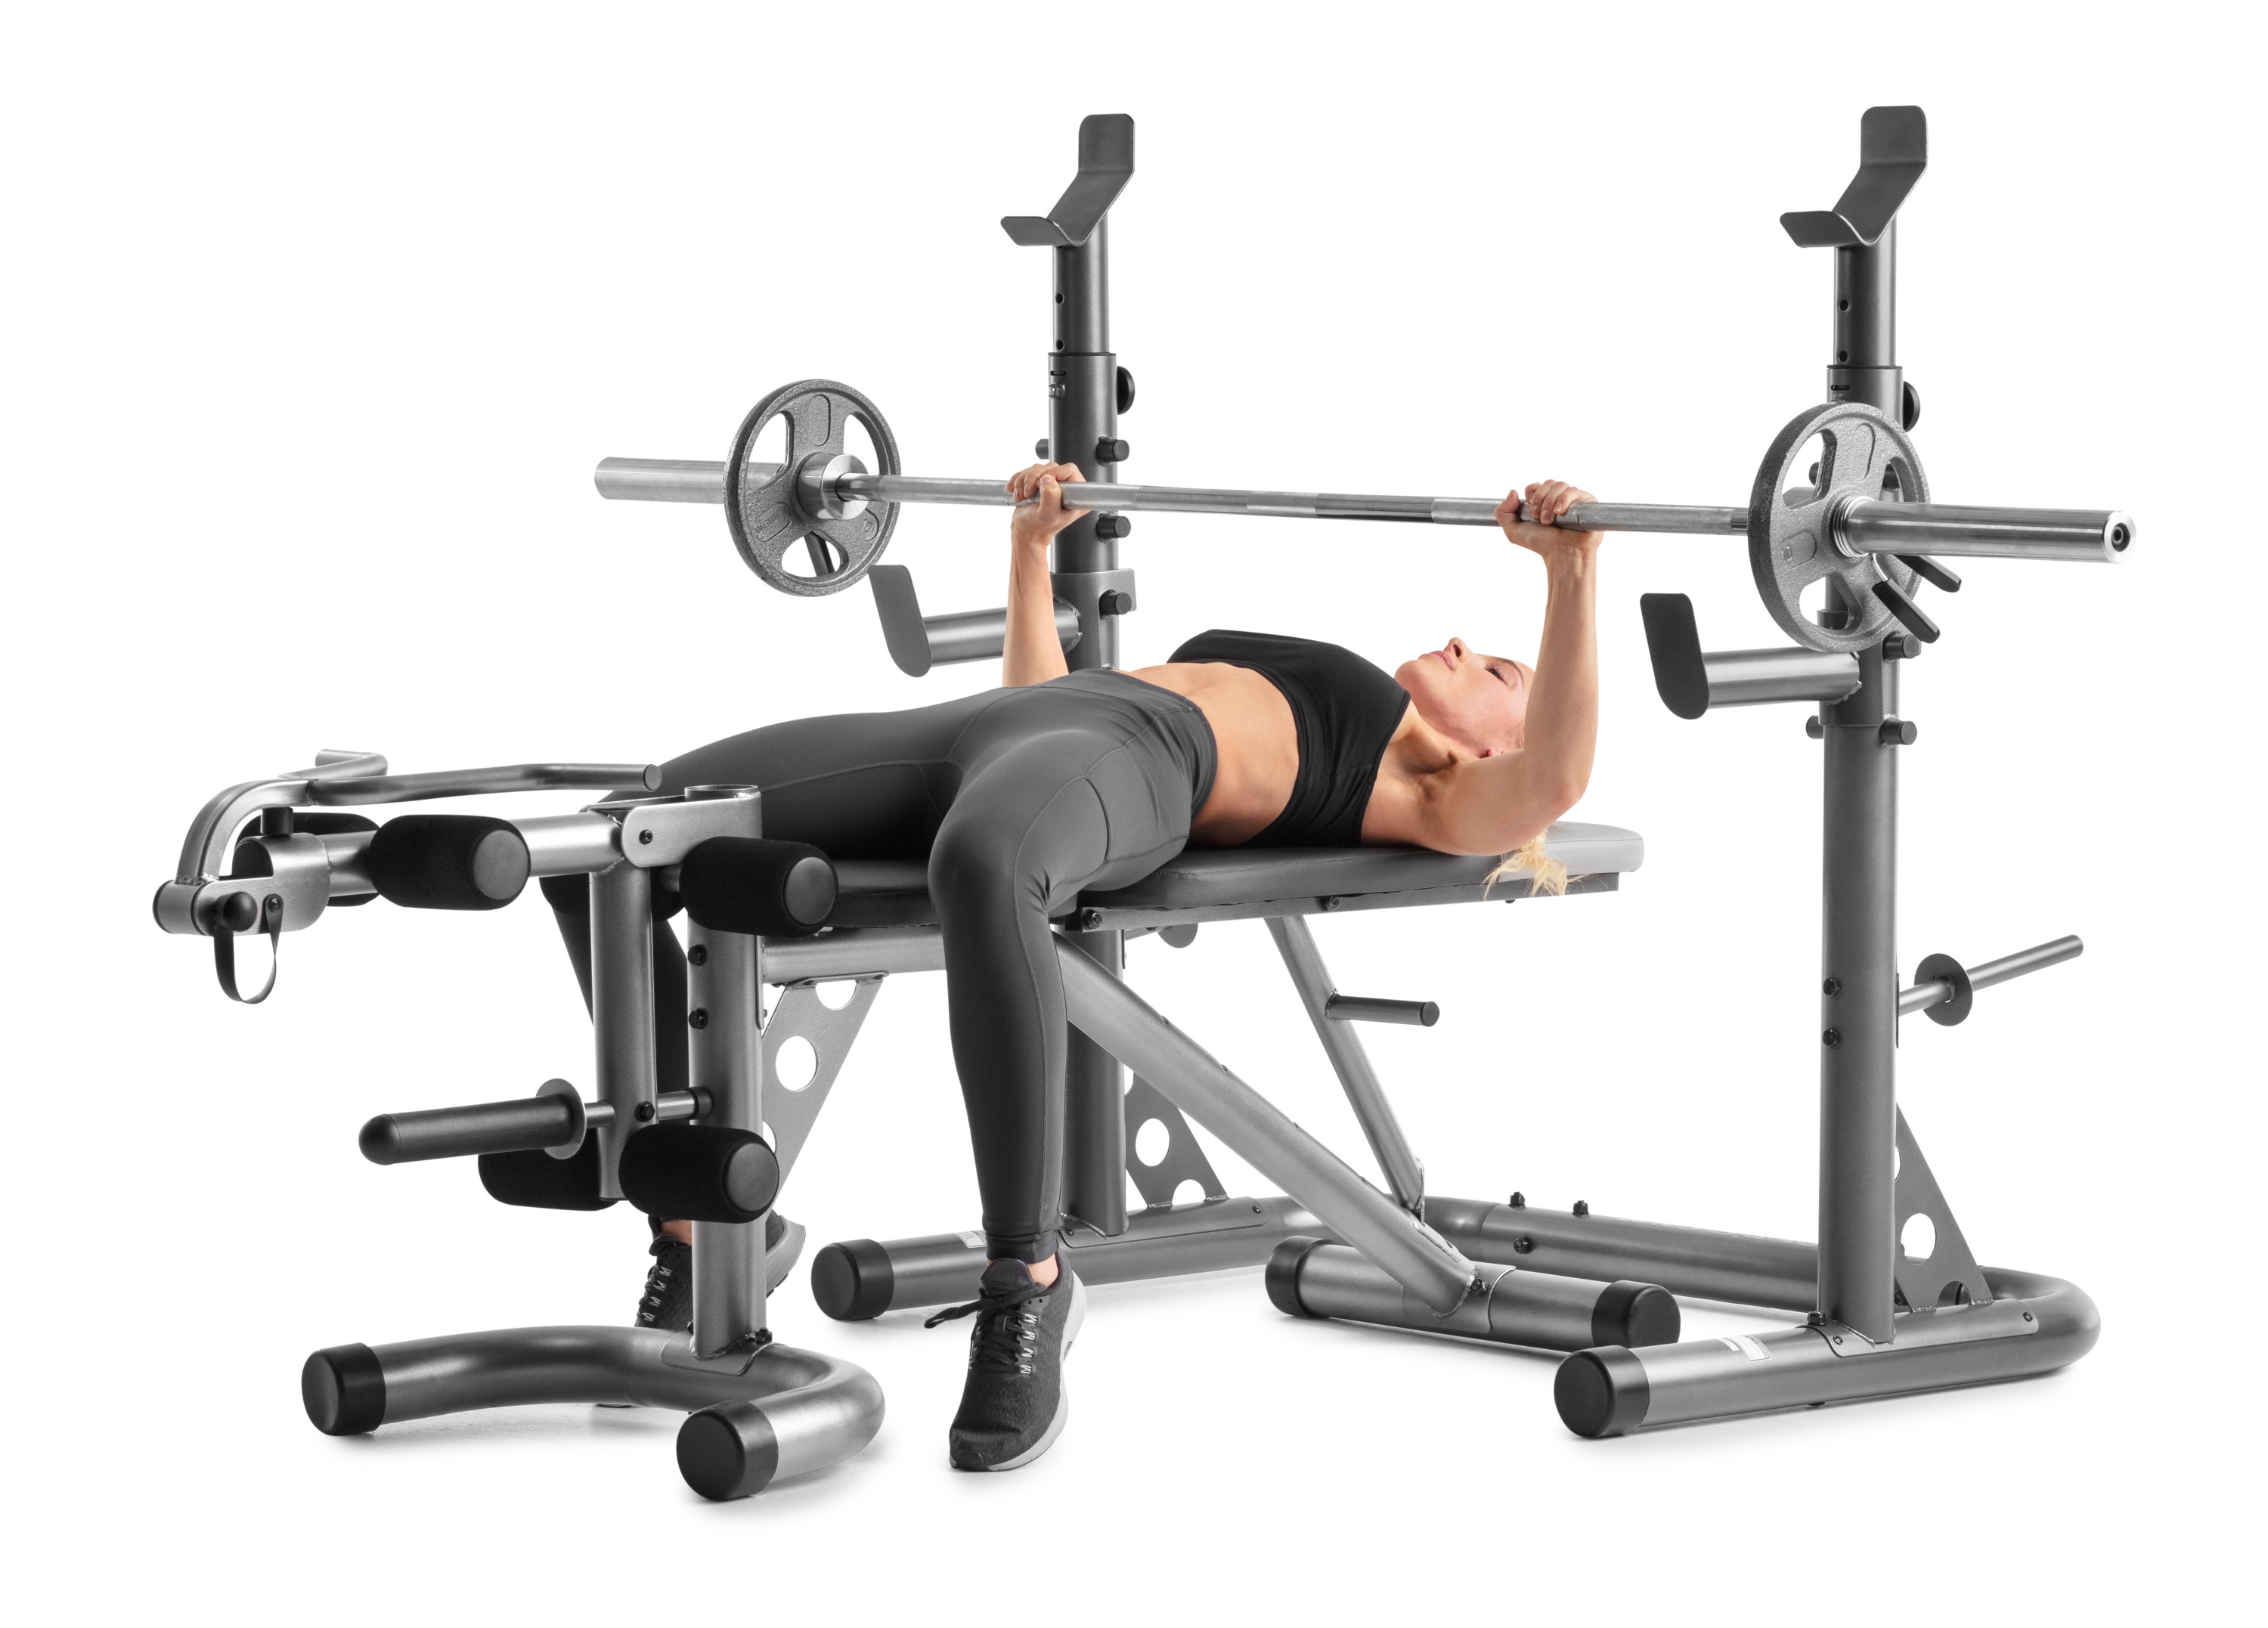 Weider XRS 20 Adjustable Bench with Olympic Squat Rack and Preacher Pad, 610 lb. Weight Limit - image 9 of 13